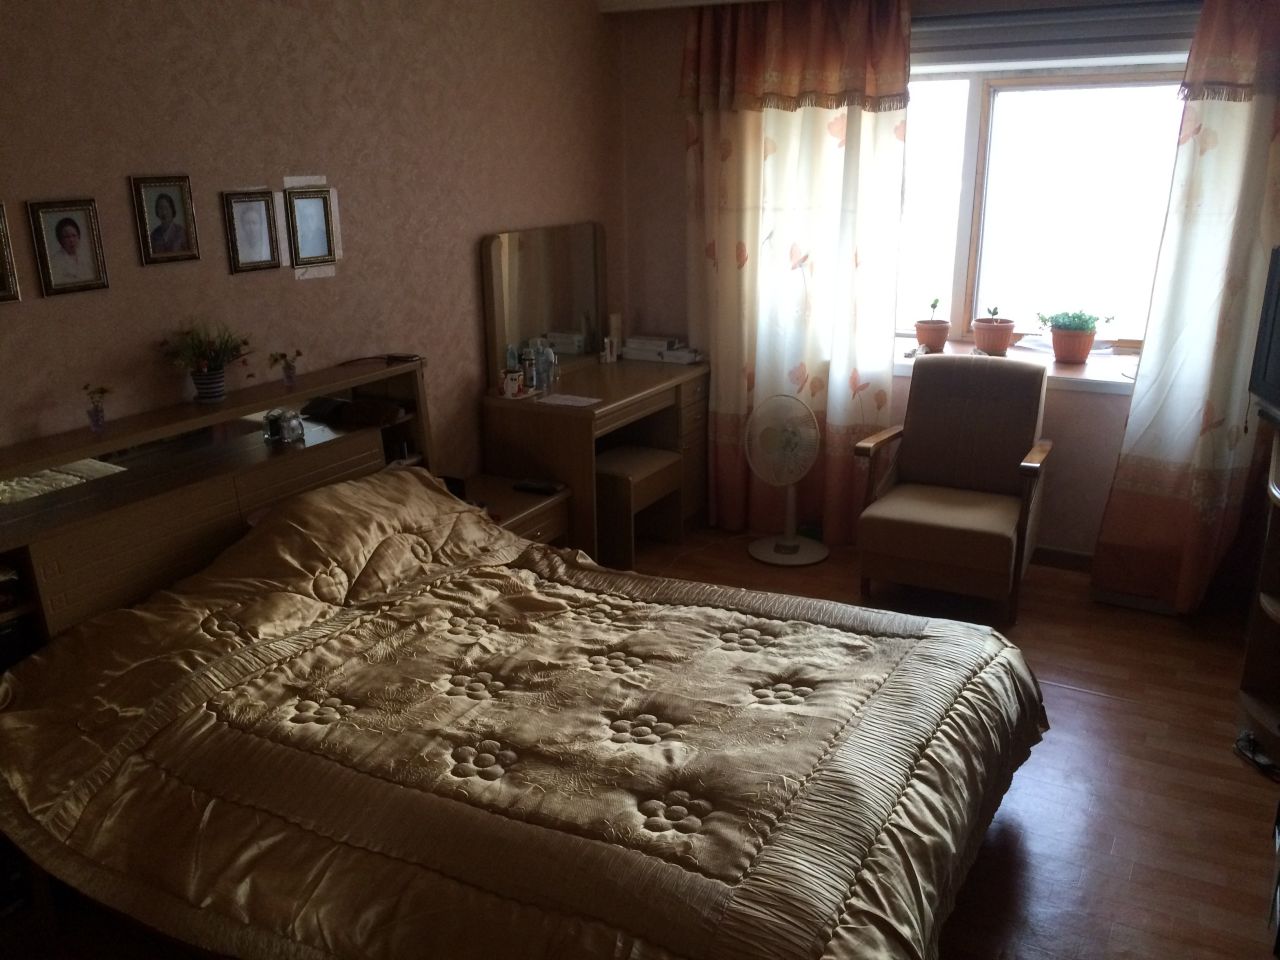 This is the master bedroom of the three-bedroom apartment. A university professor lives in the home with his adult children. It's 200 square meters (about 2,150 square feet). That's large for an apartment in Pyongyang.